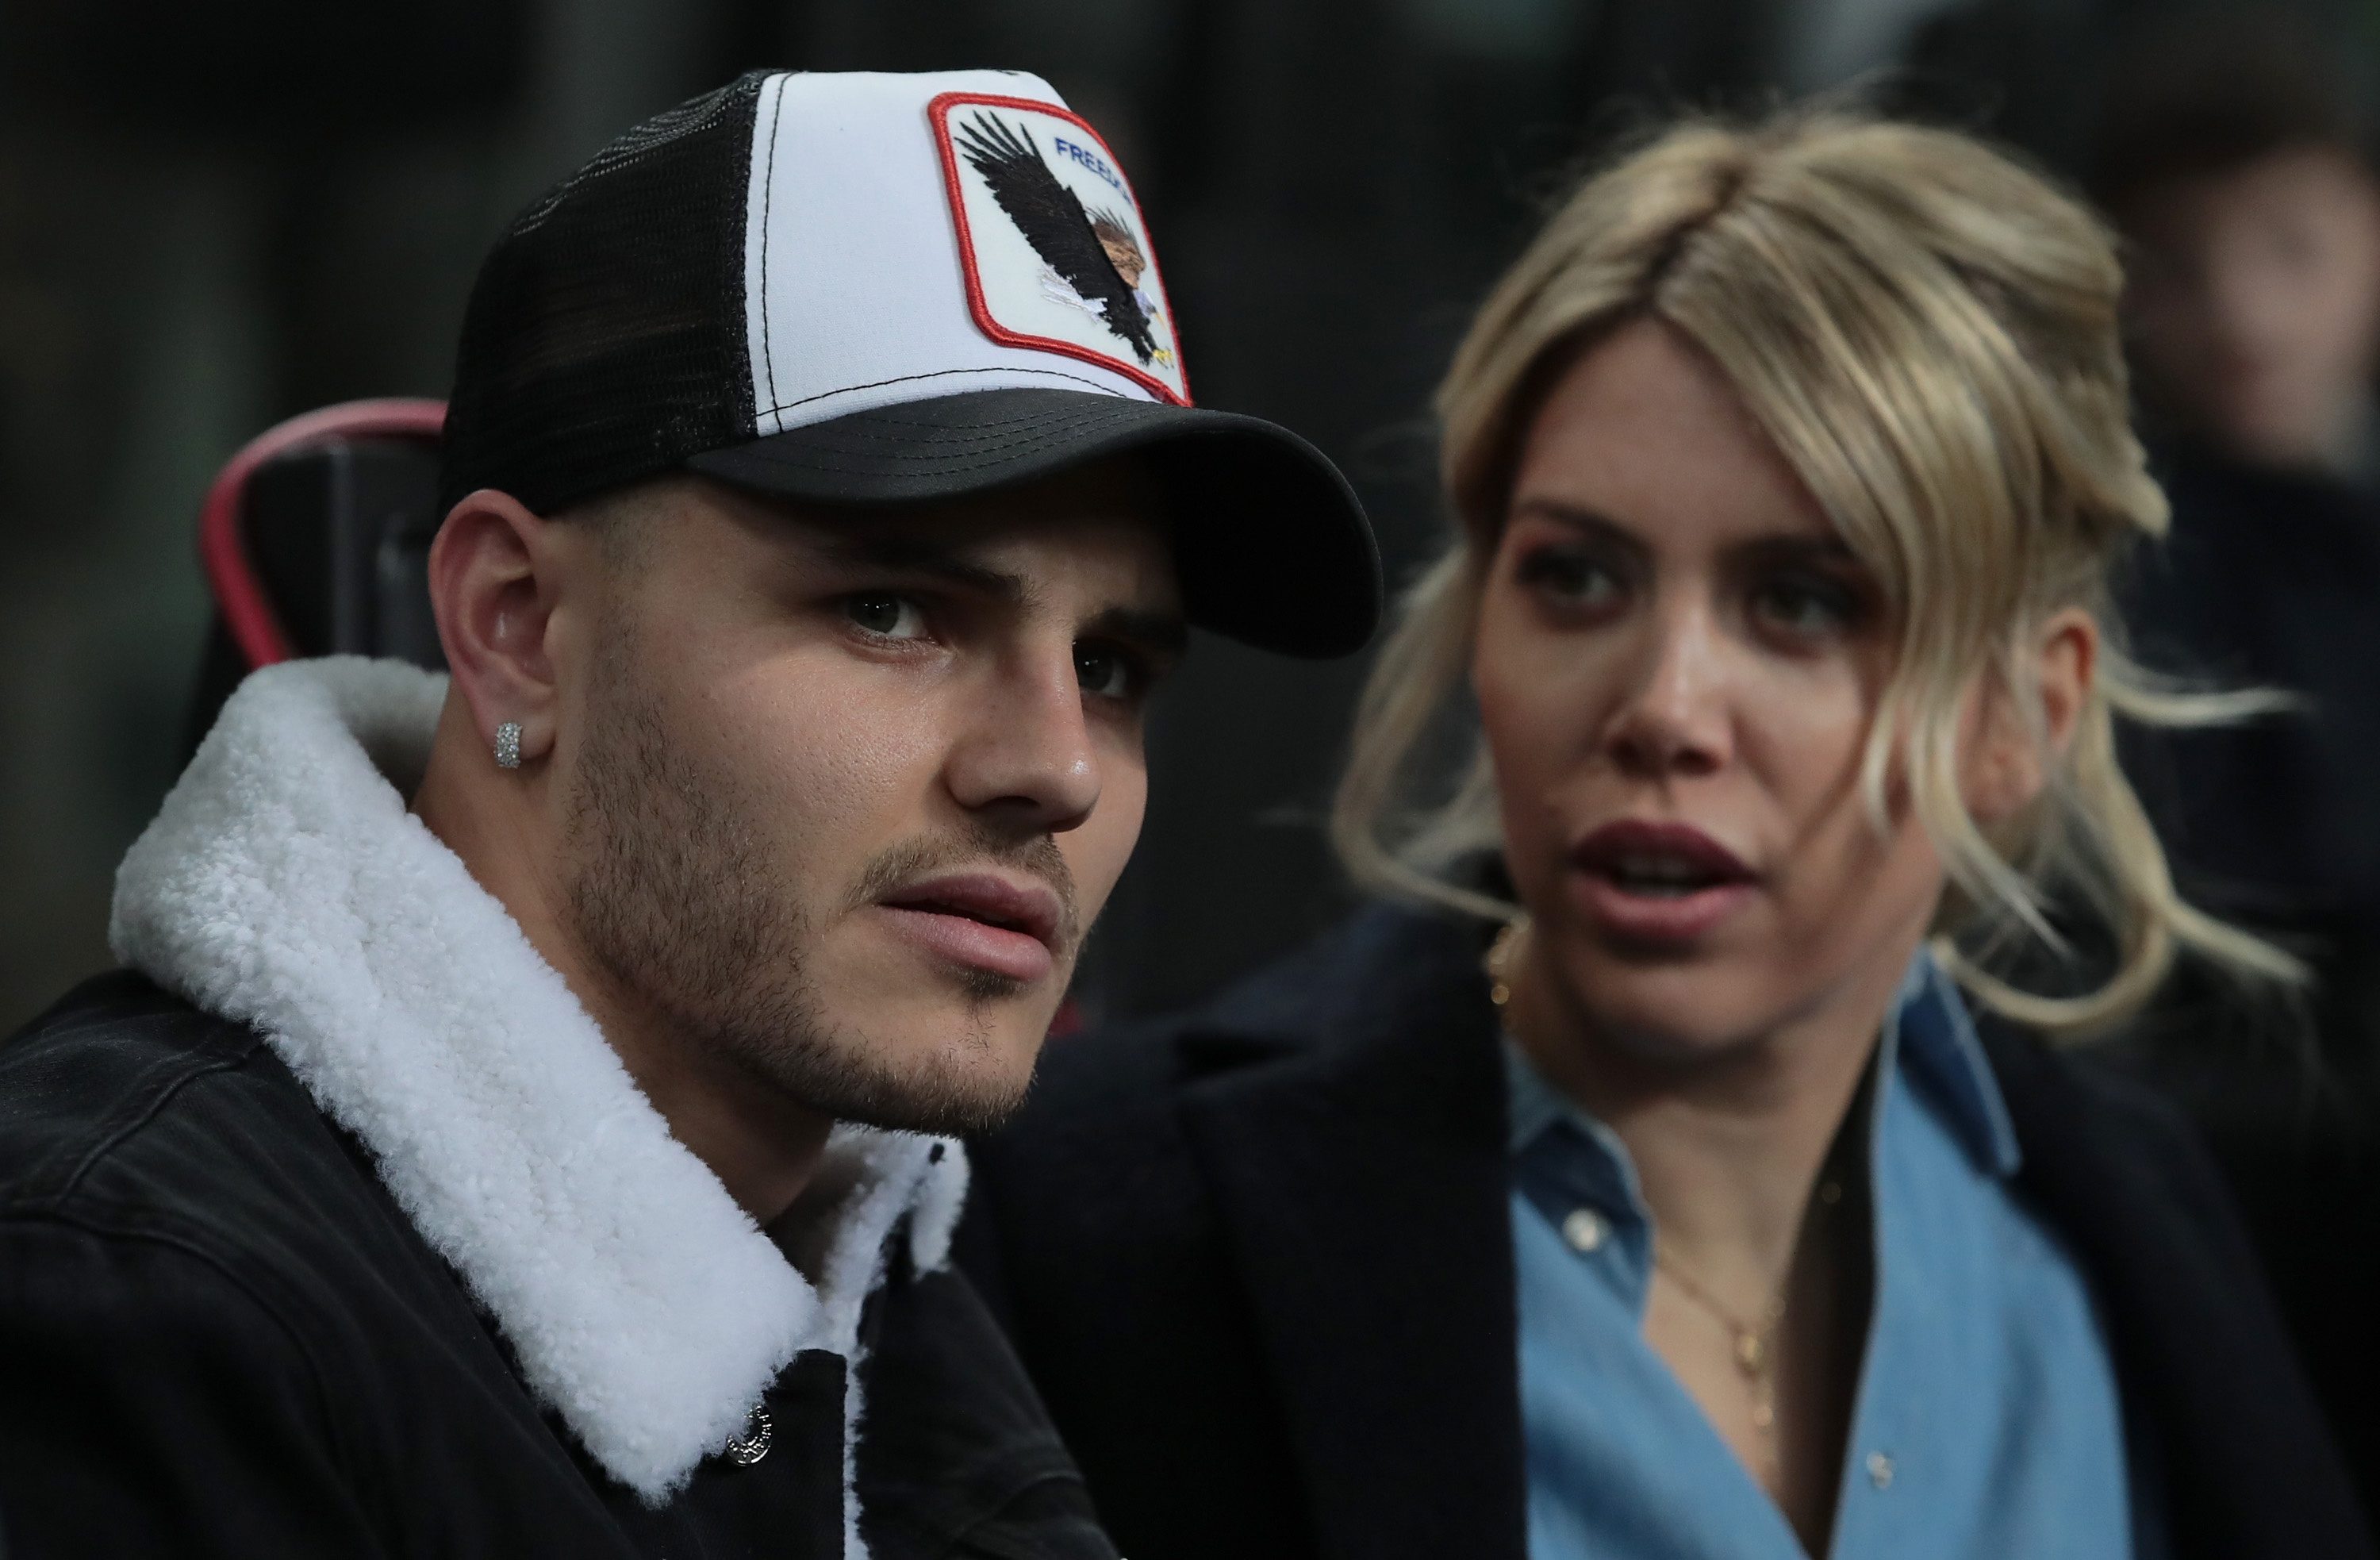 MILAN, ITALY - FEBRUARY 21:  Mauro Emanuel Icardi of FC Internazionale and his wife Wanda Nara attend the UEFA Europa League Round of 32 Second Leg match between FC Internazionale and SK Rapid Wien at San Siro on February 21, 2019 in Milan, Italy.  (Photo by Emilio Andreoli/Getty Images)